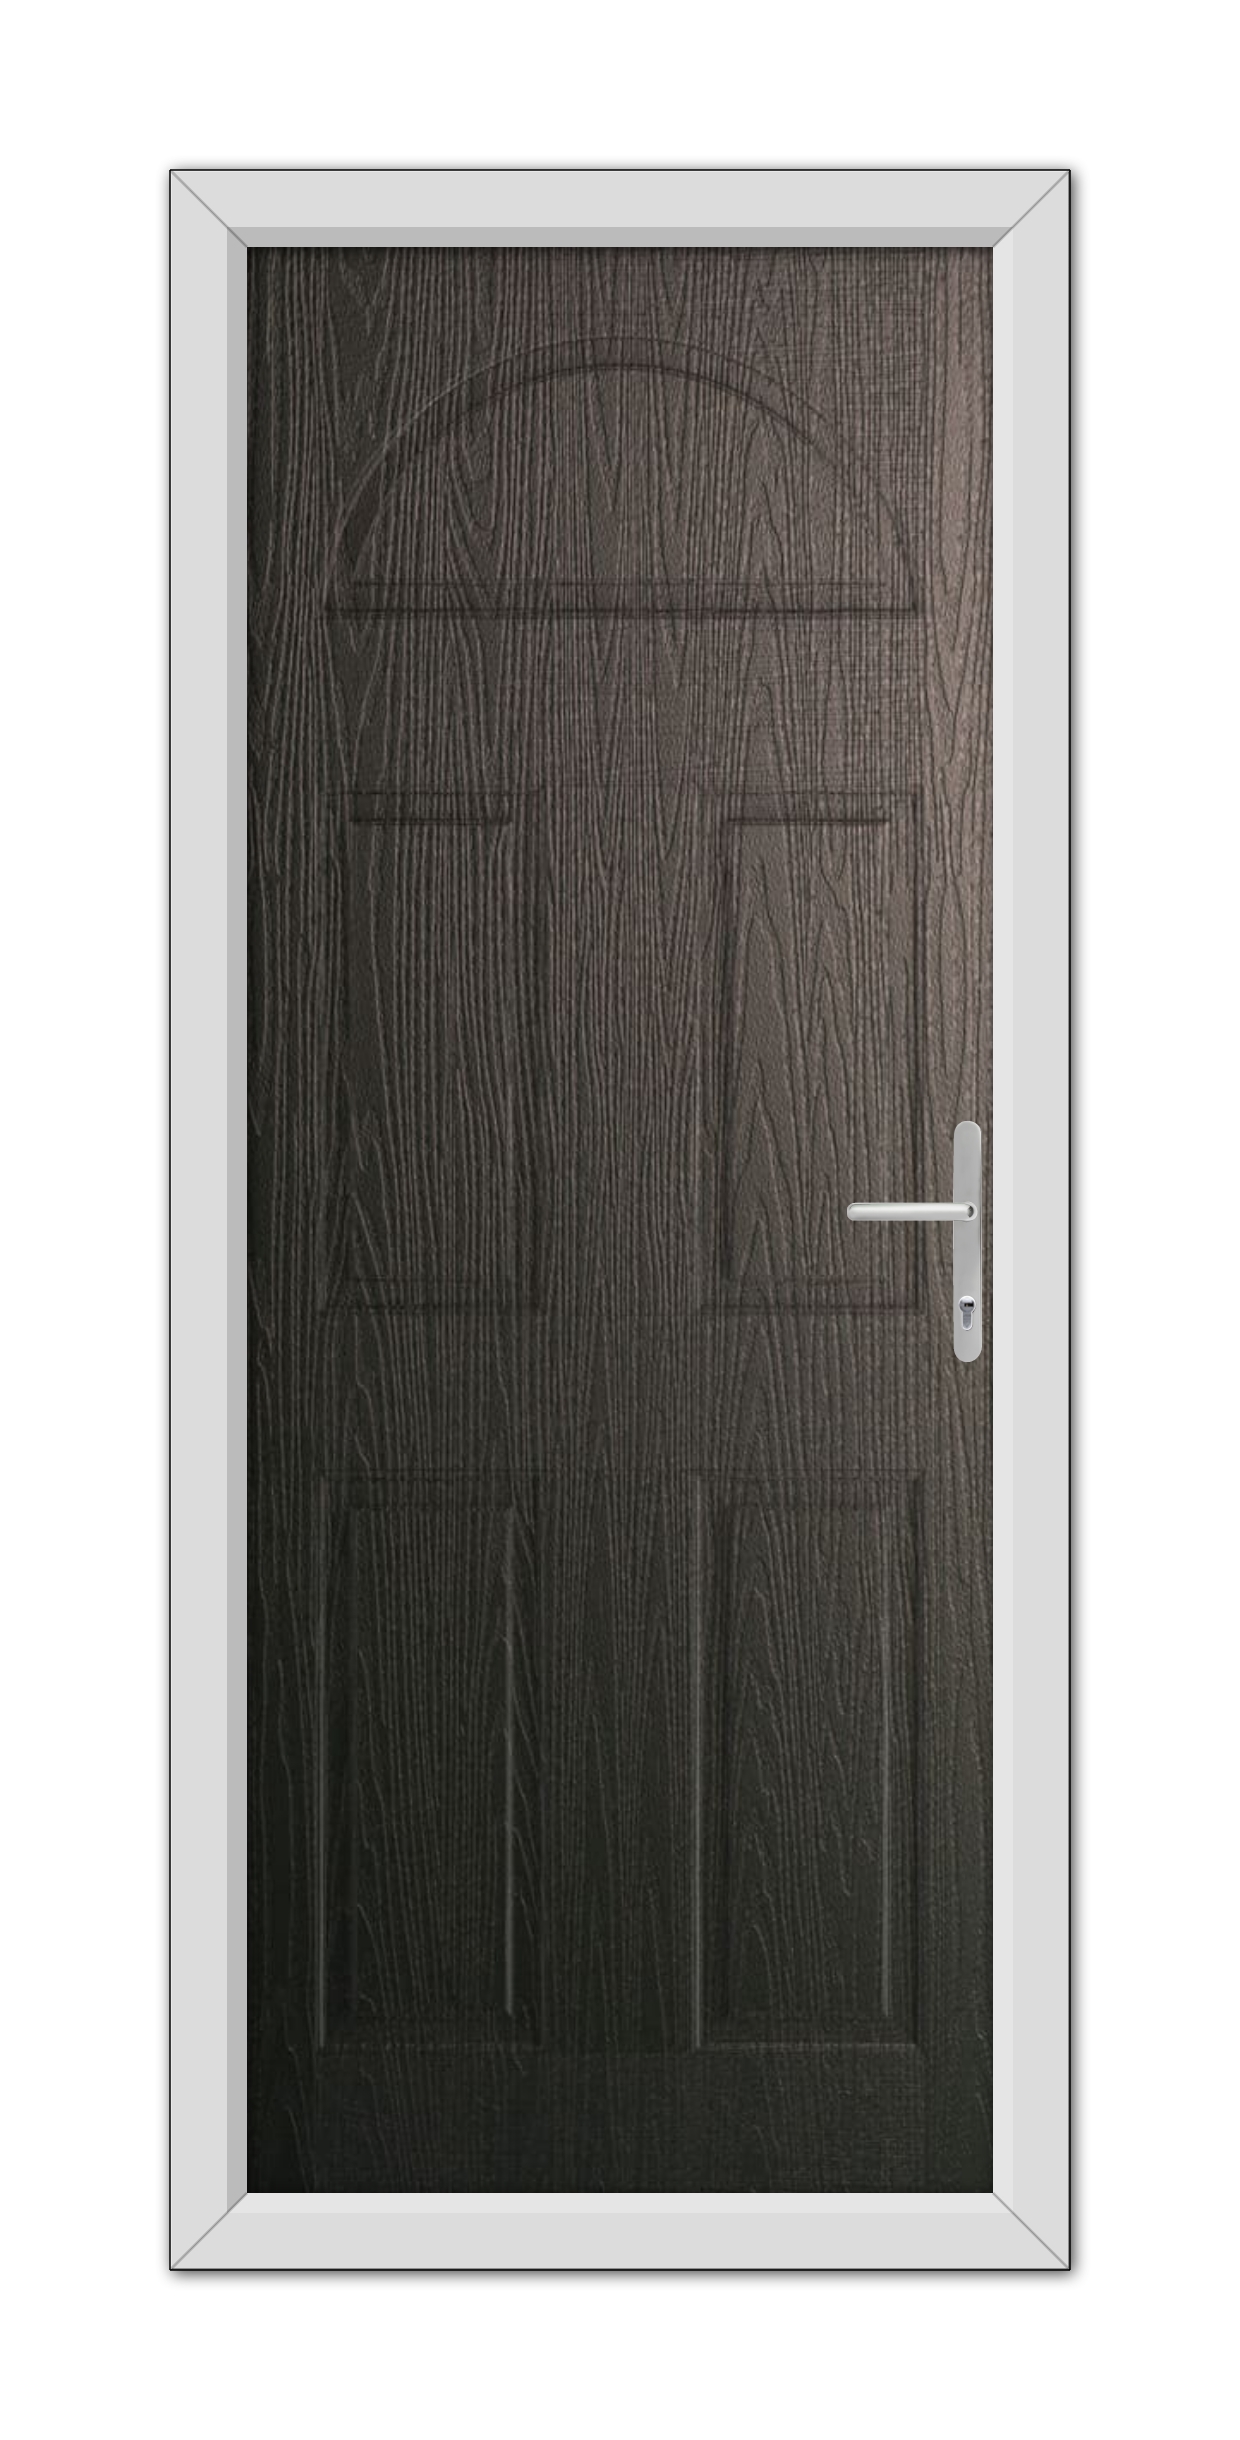 A Schwarzbraun Middleton Solid Stable Composite Door 48mm Timber Core with a white frame and a modern silver handle, set against a white background.